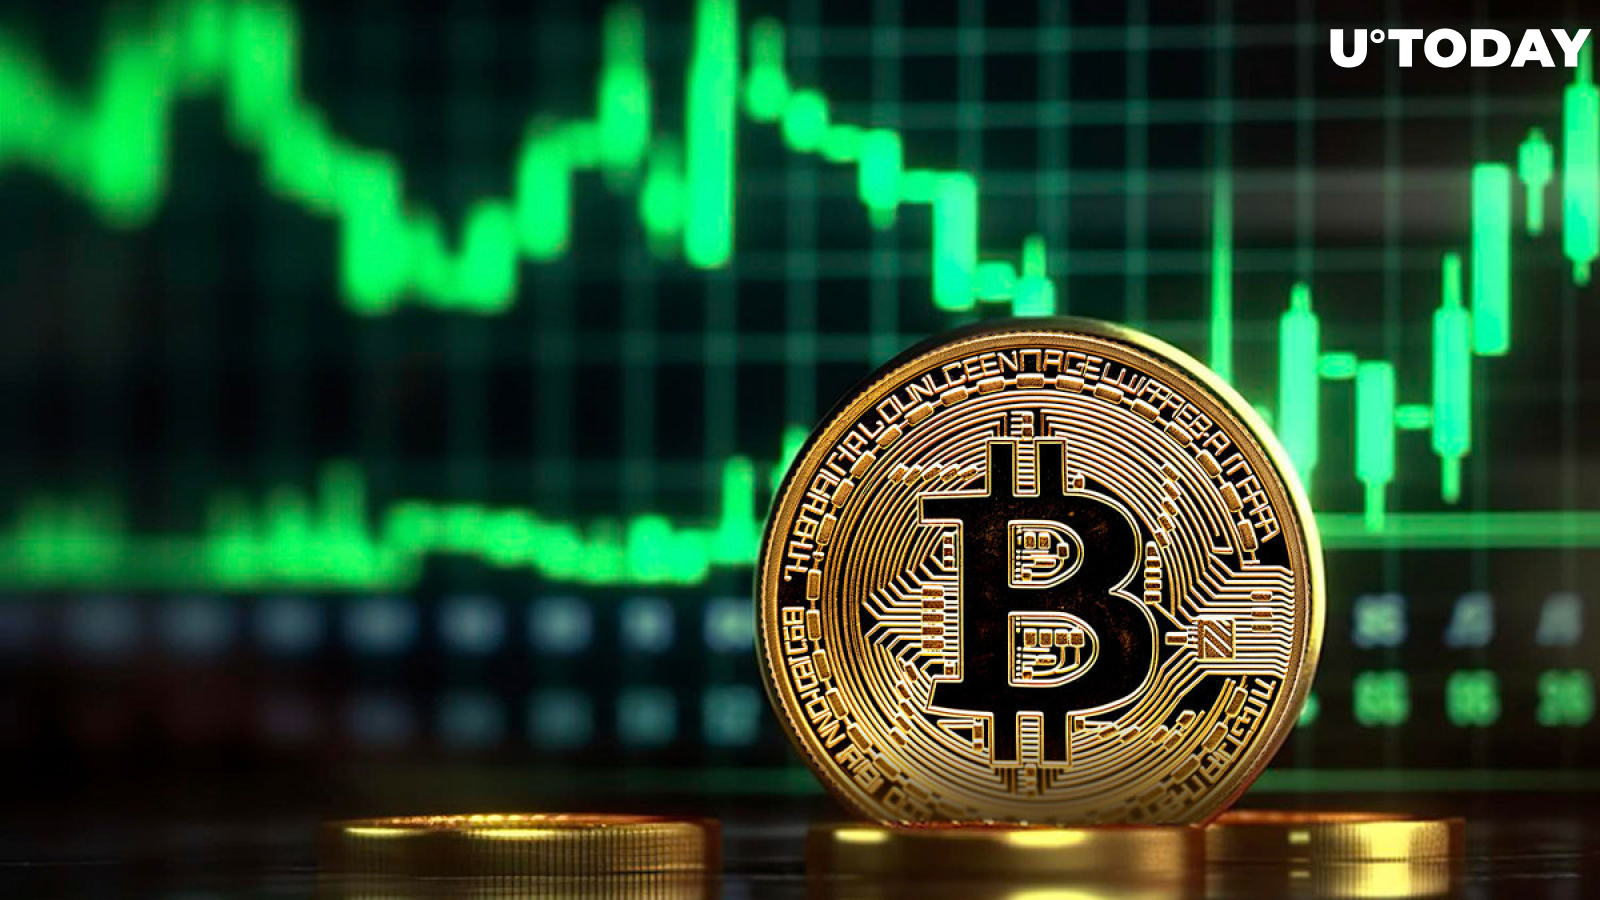 Bitcoin (BTC) Target Remains $36,500-$37,000, Trend Is Upward, Analyst Says